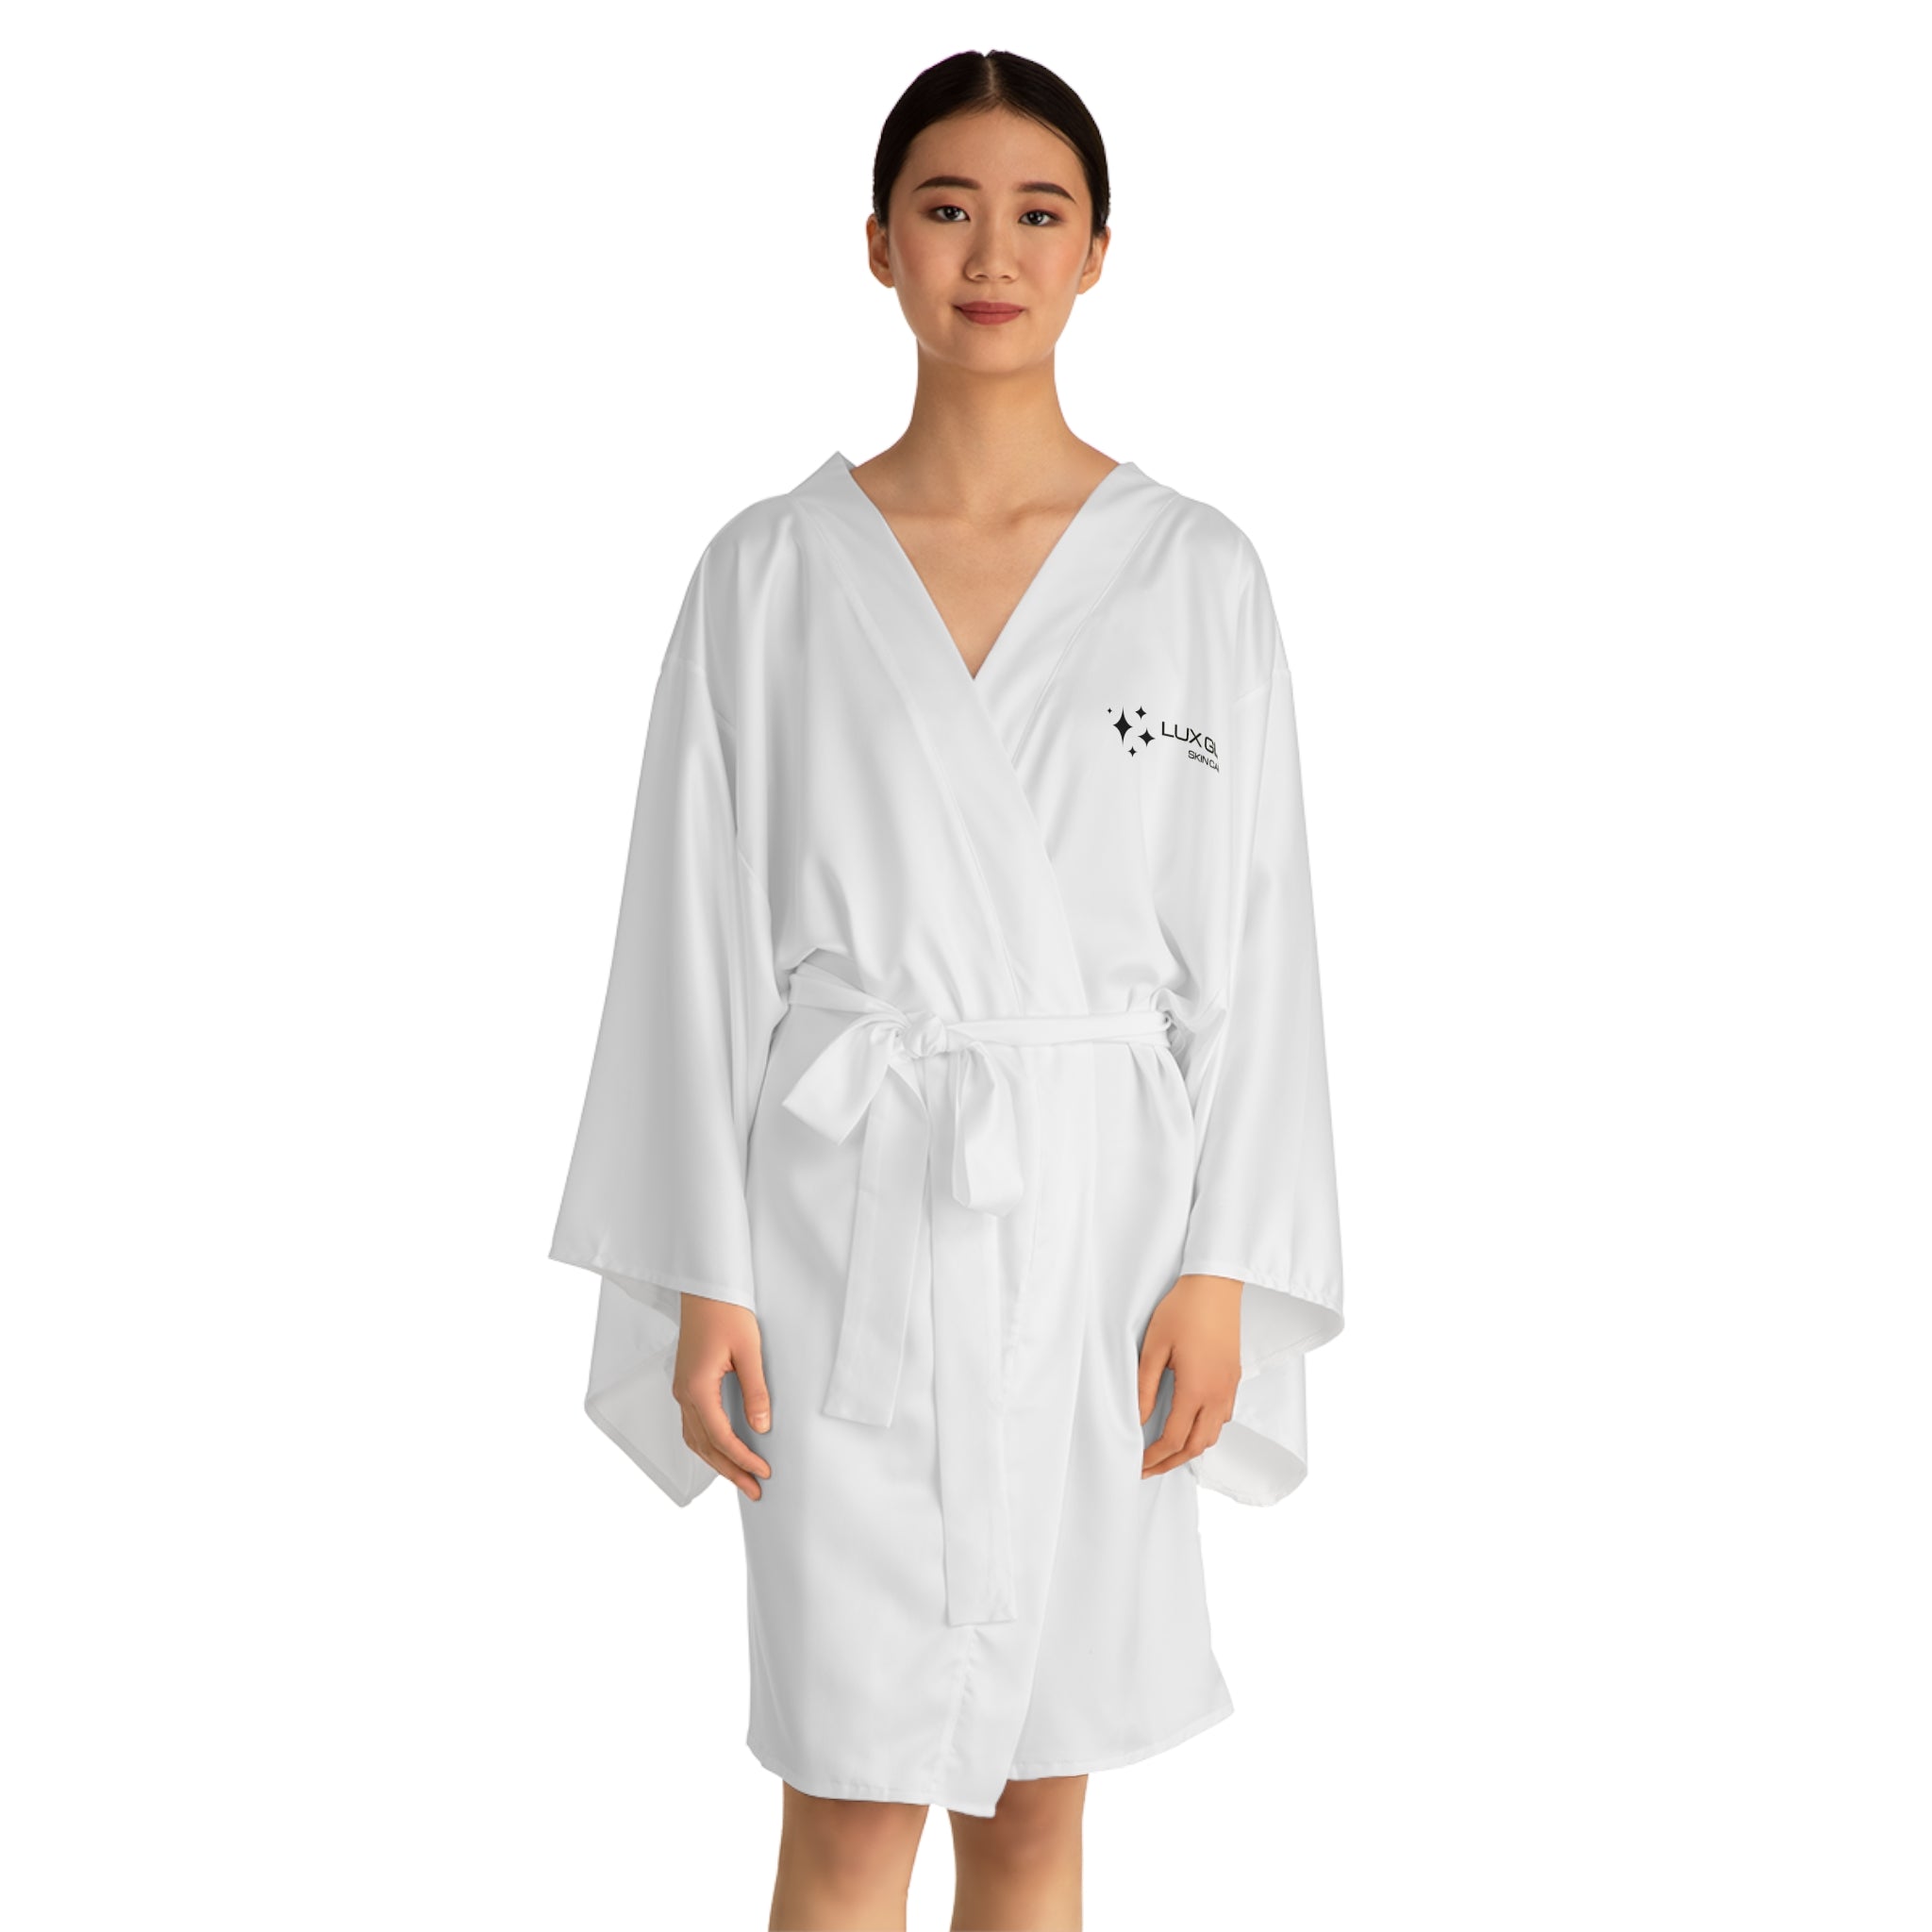 The Lux Glow Kimono Robe is designed for comfort and style, perfect for lounging at home, spa days, or poolside cover-ups. The lightweight, flowing fabric flatters various body types with a relaxed fit that drapes beautifully. The mid-length design provides ample coverage while allowing easy movement.